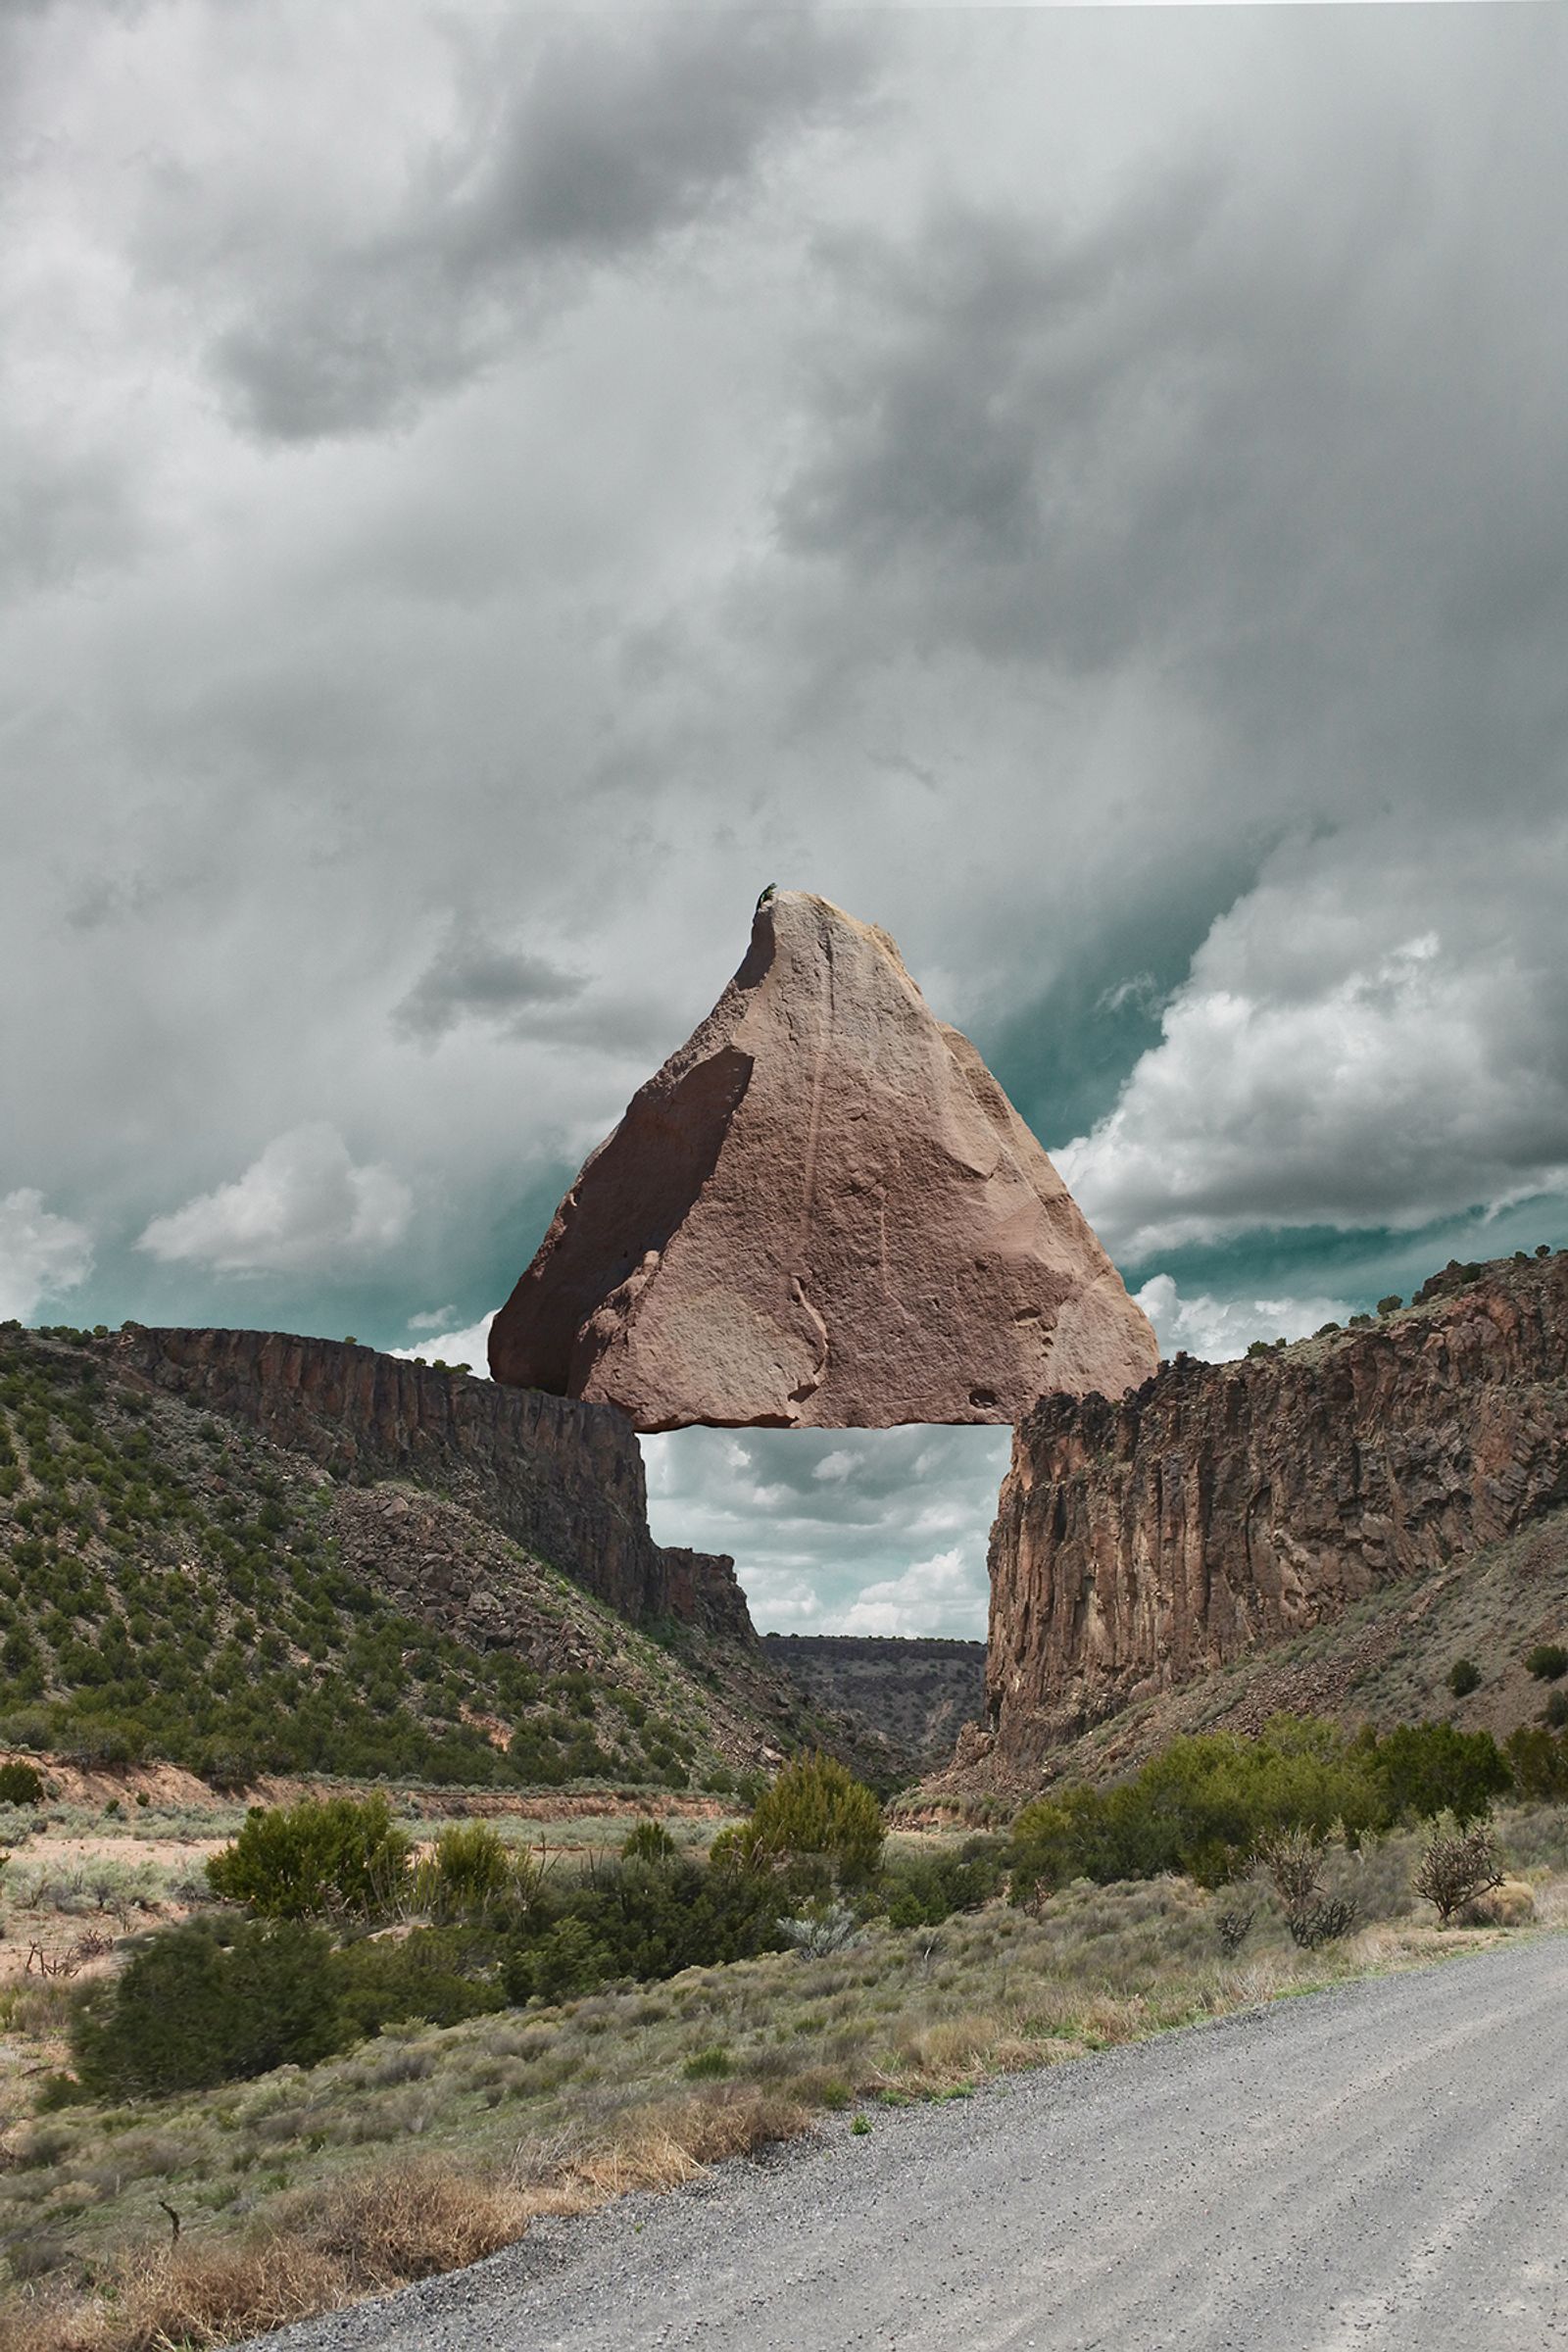 © Ellen Jantzen - Image from the Unexpected Geology photography project